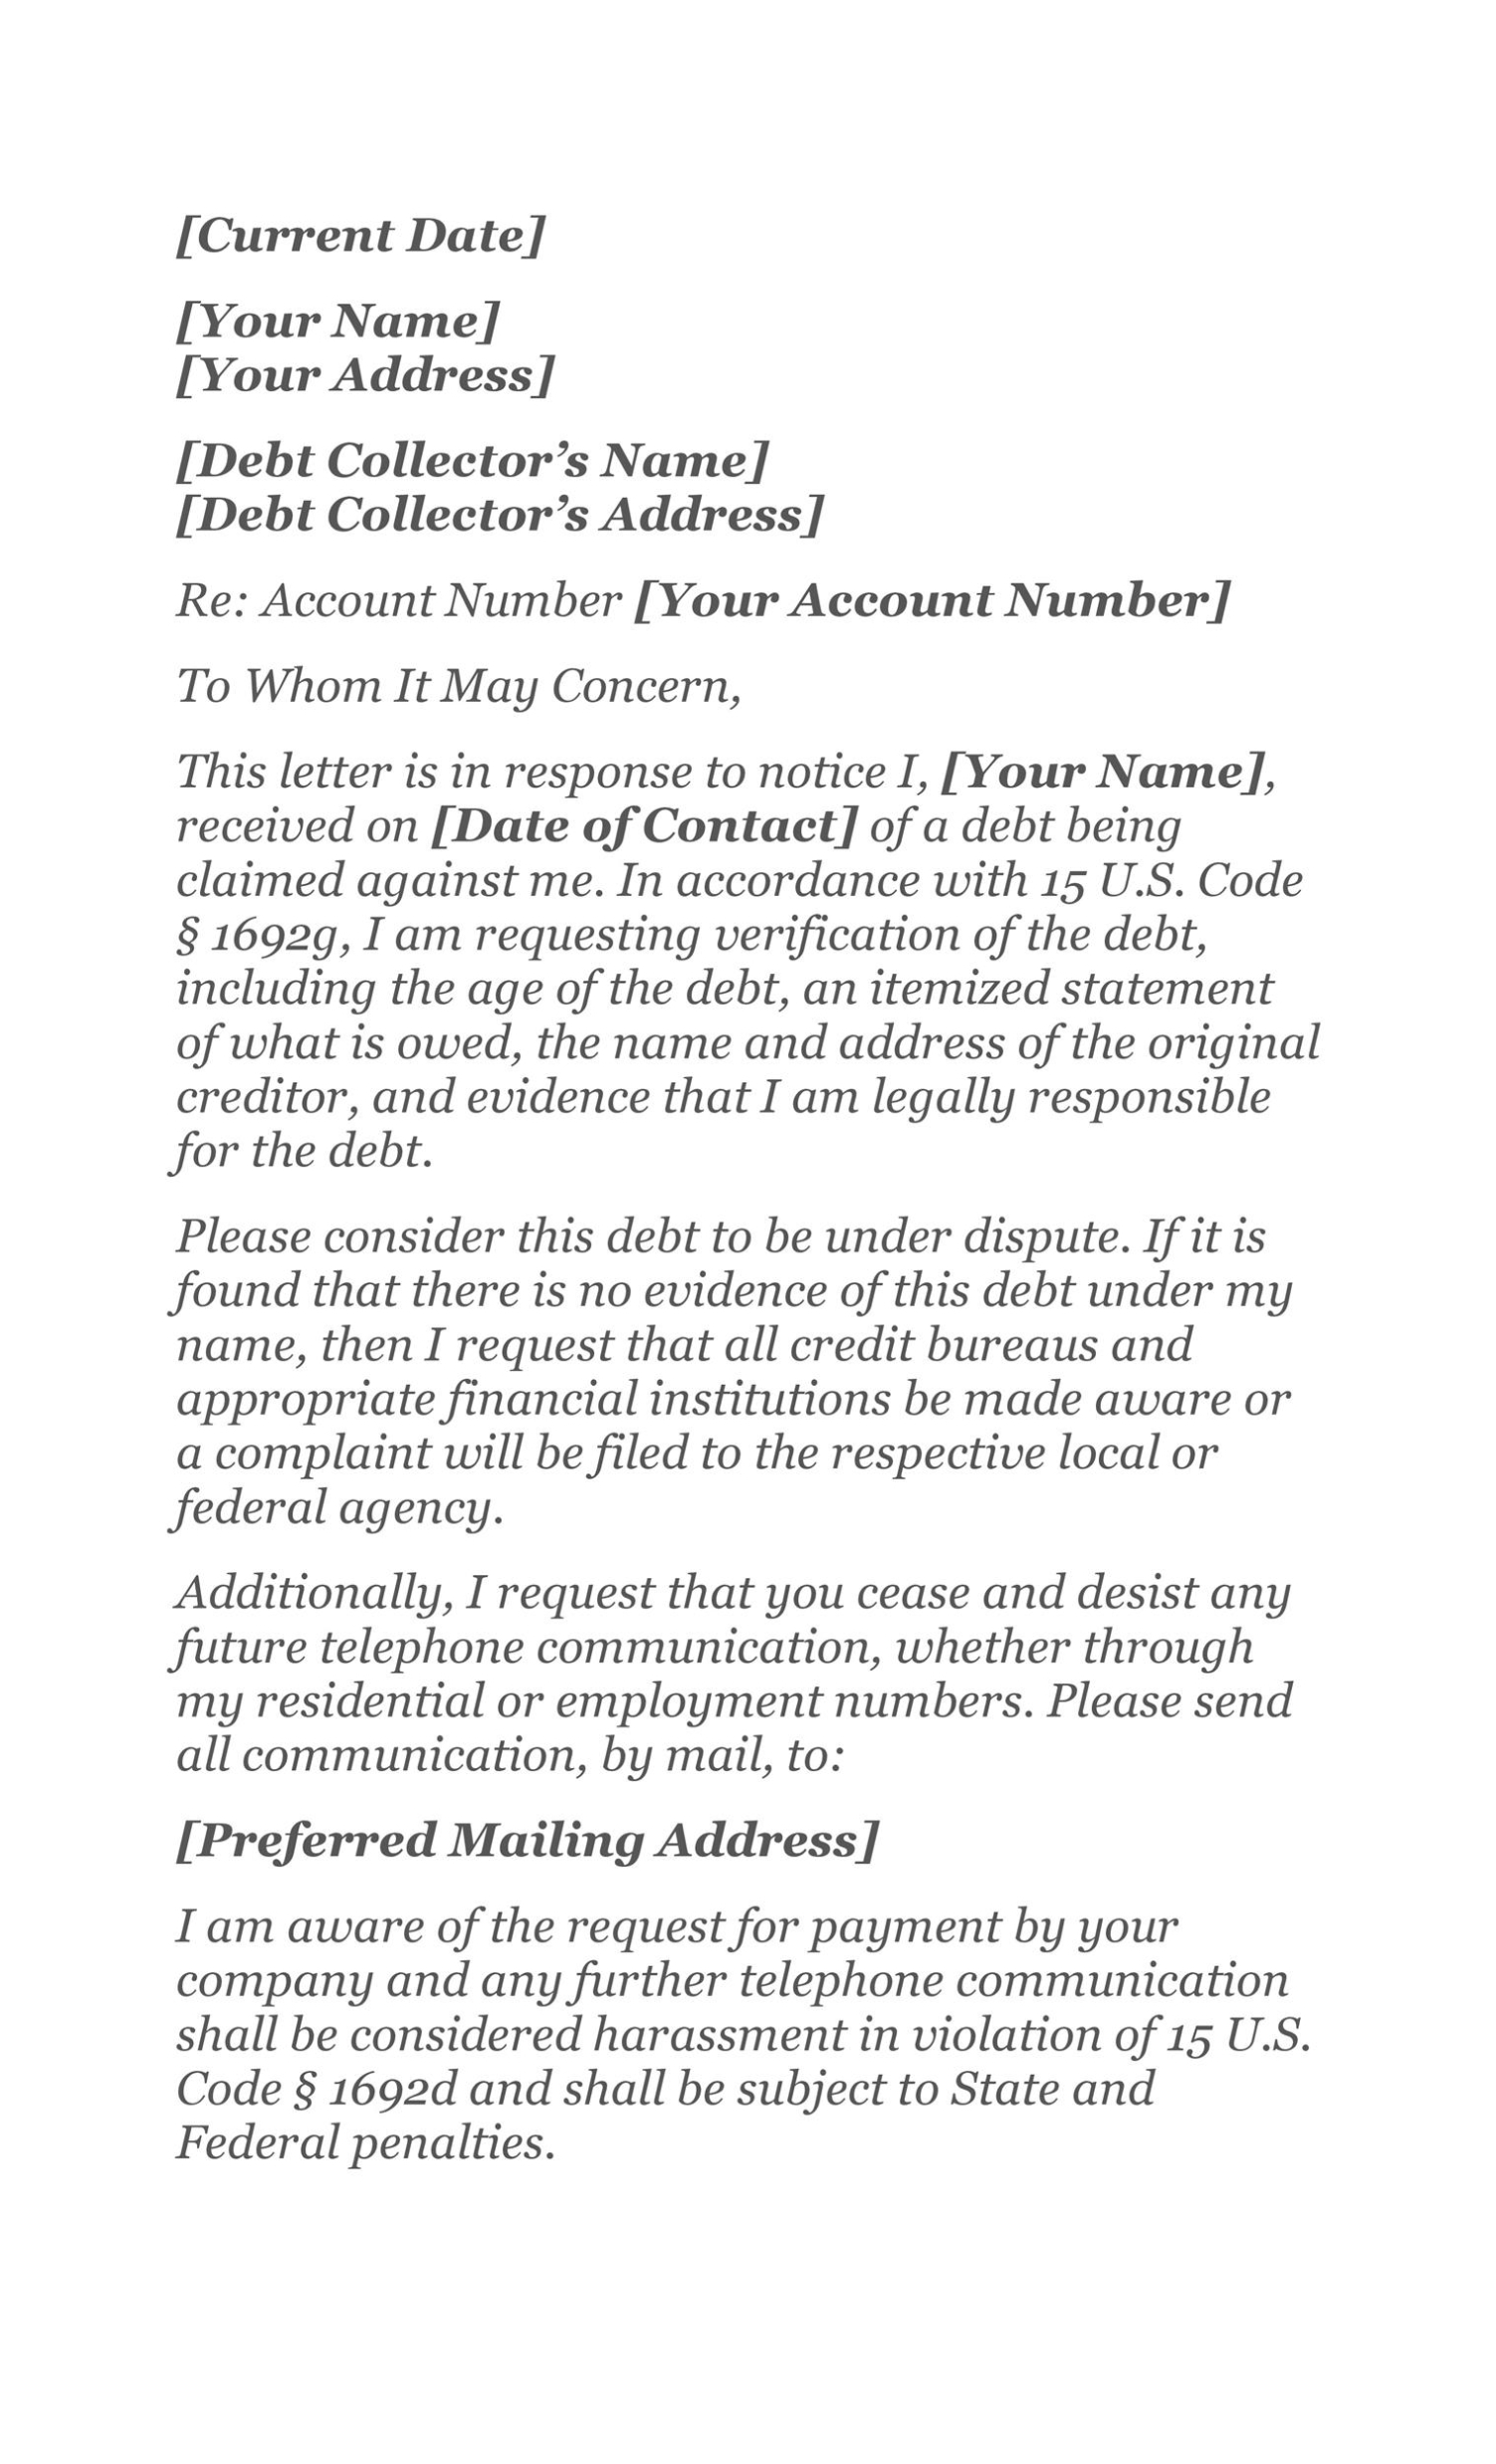 50 Free Debt Validation Letter Samples & Templates ᐅ Templatelab Regarding Debt Validation Letter Template